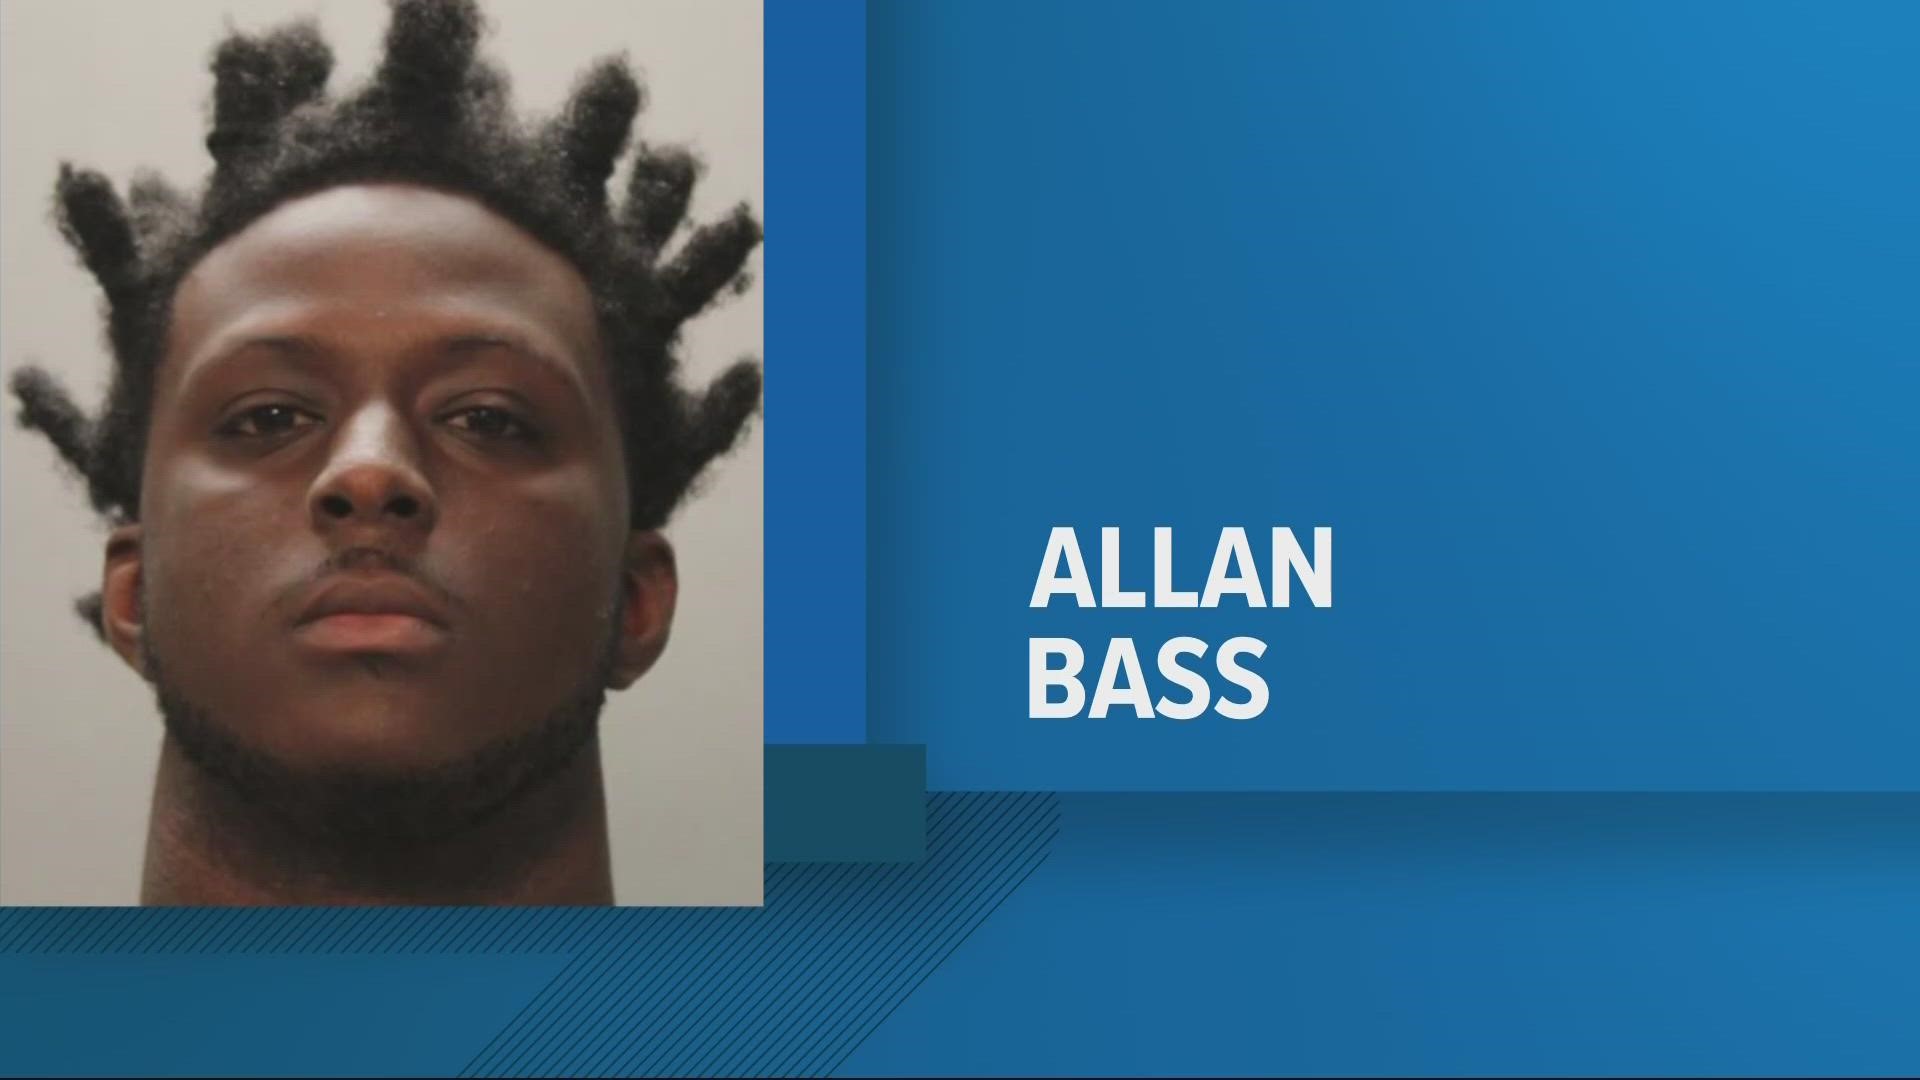 Antonio Bass, 21, is charged with murder in the Jan. 19 death of a man in the Emerson area. JSO's gang unit responded to another shooting death in that area Monday.